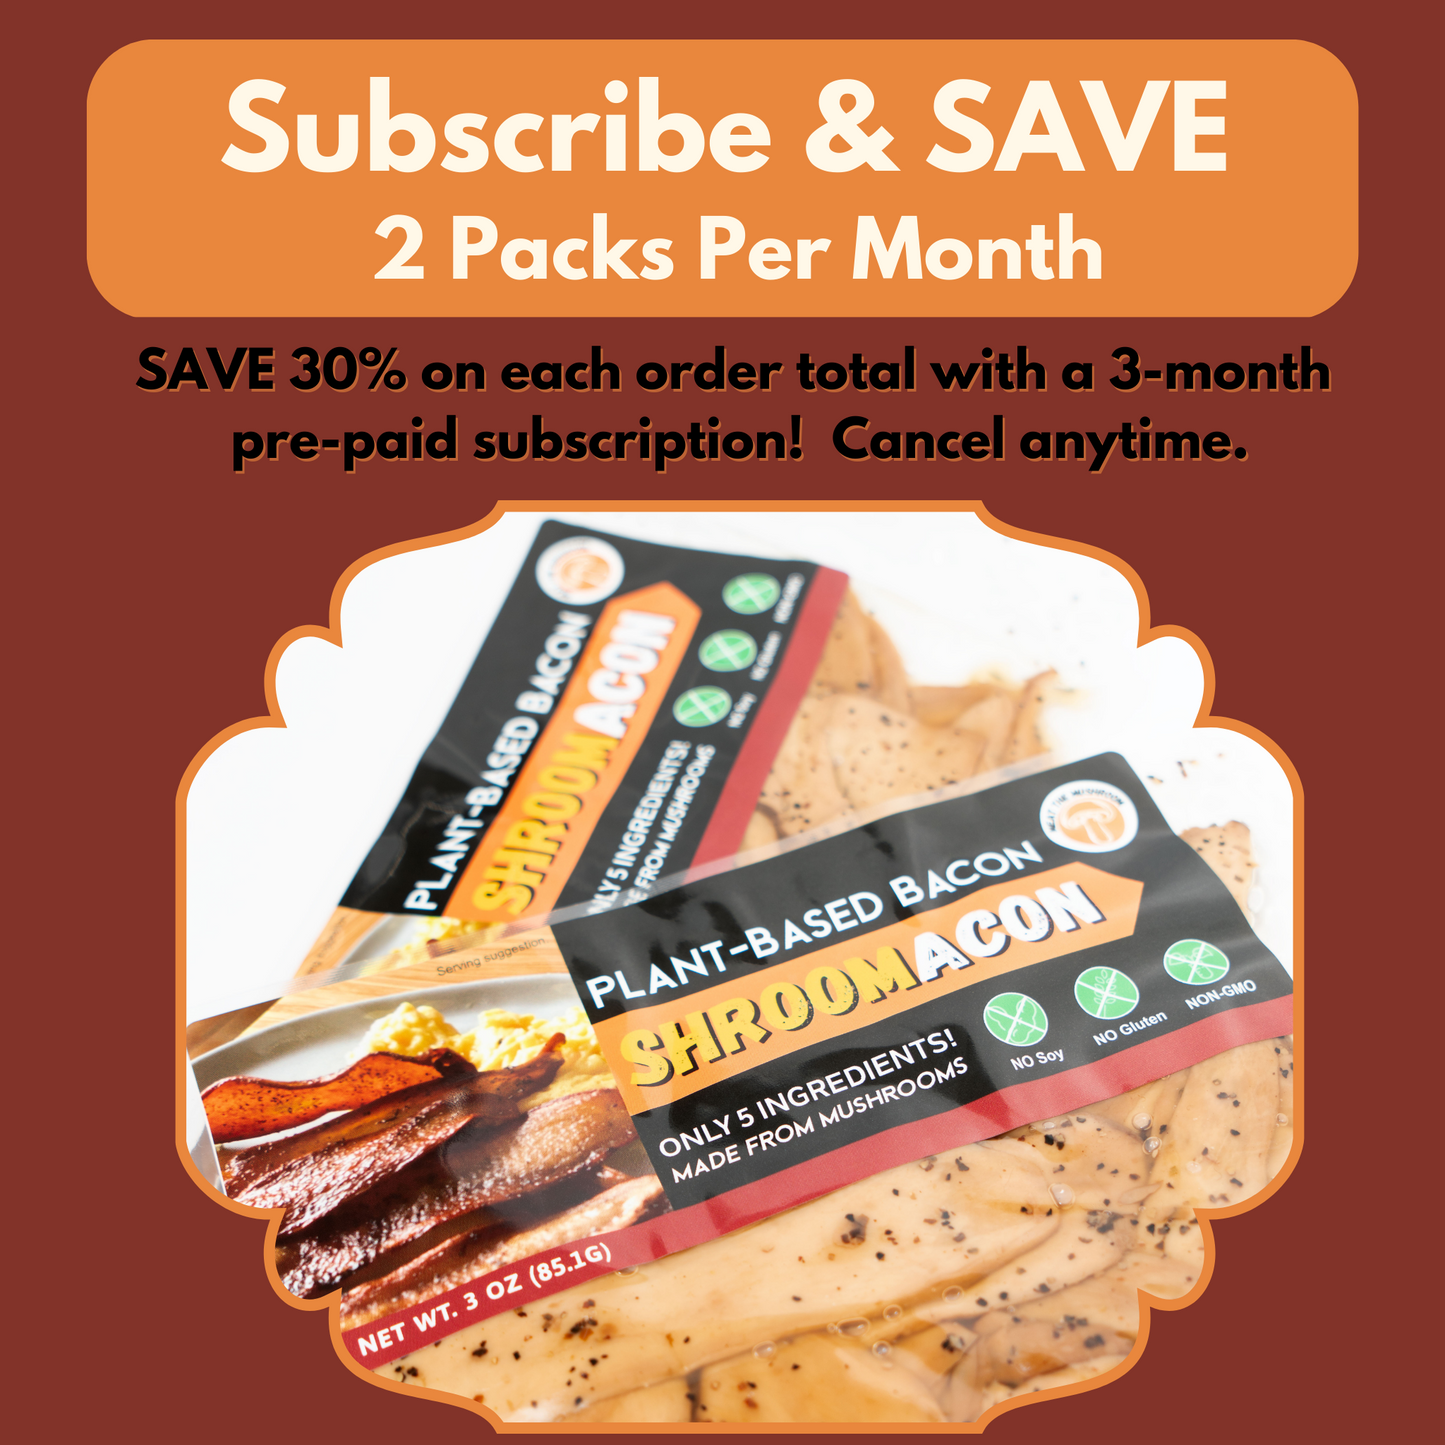 SHROOMACON - Subscribe & SAVE: 2 Packs Per Month